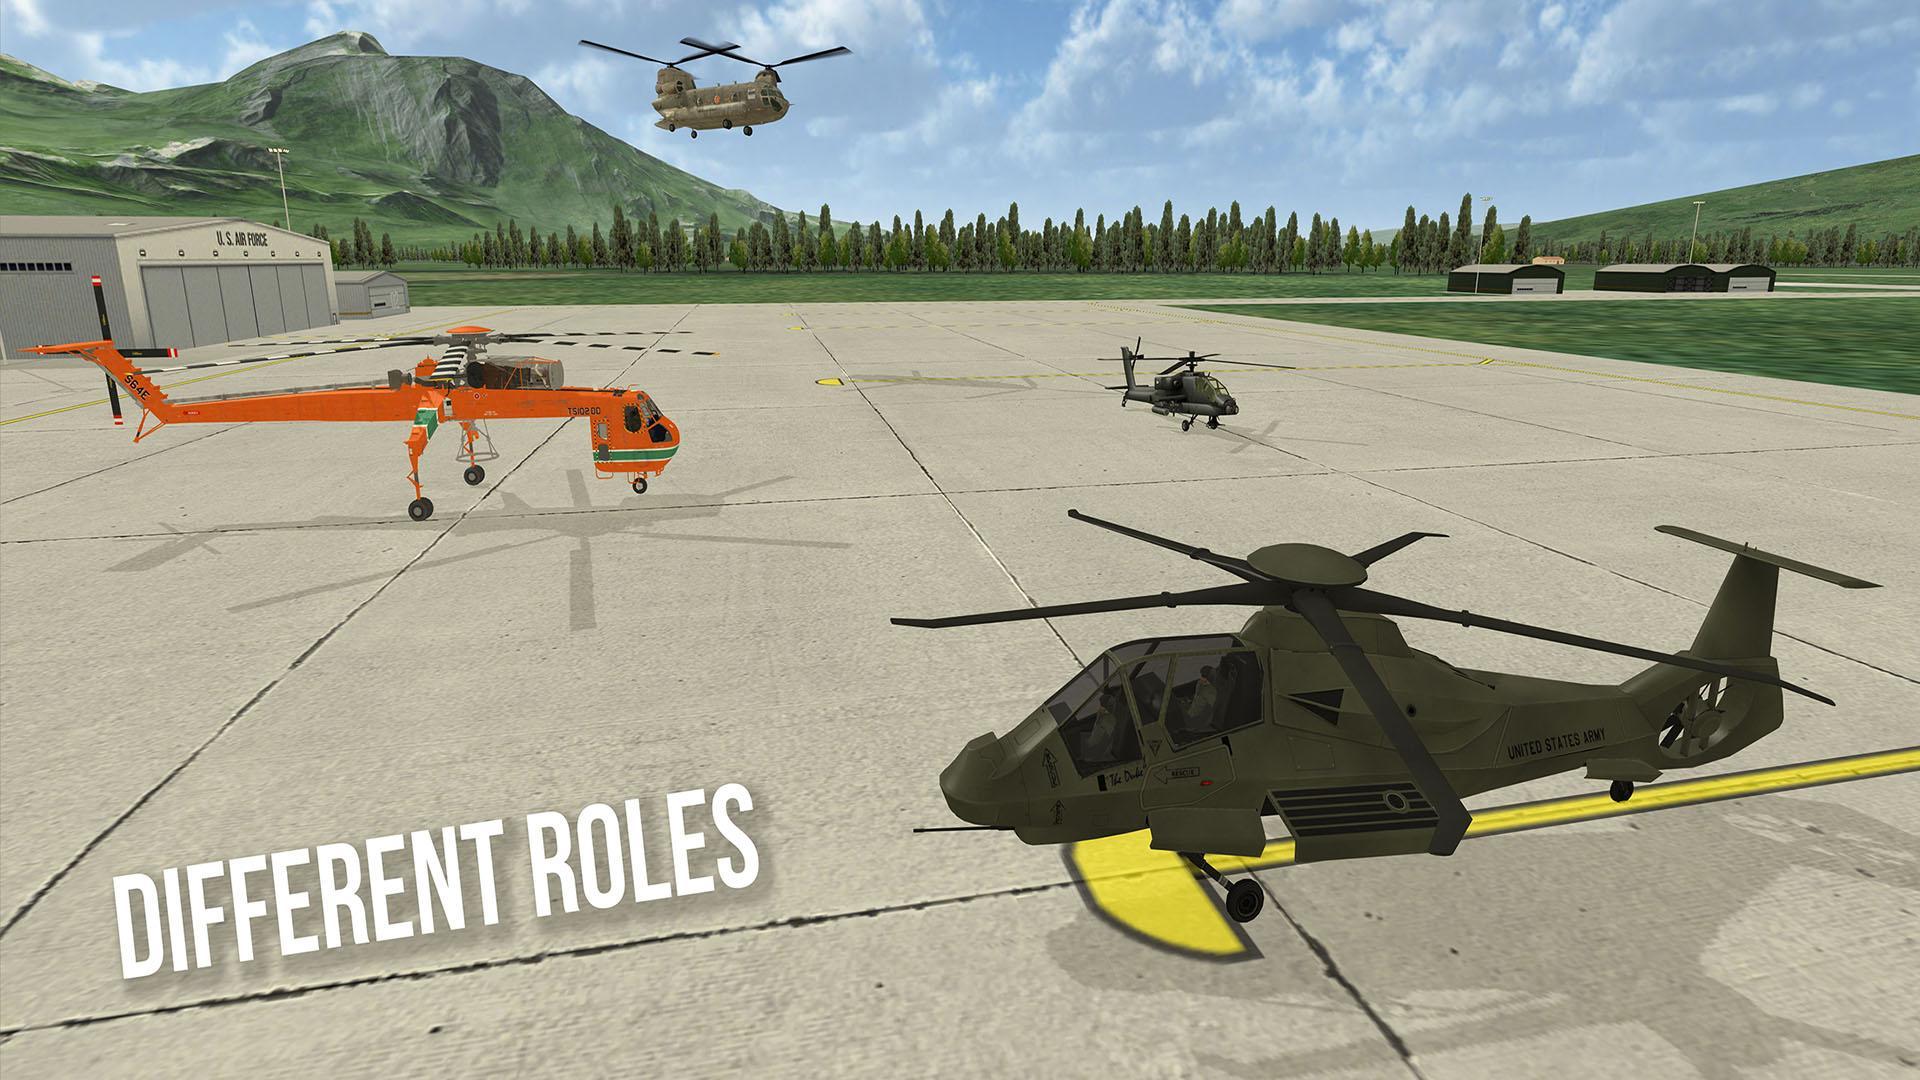 Helicopter Sim Flight Simulator Air Cavalry Pilot For Android Apk Download - flight simulator new plane helicopter added roblox